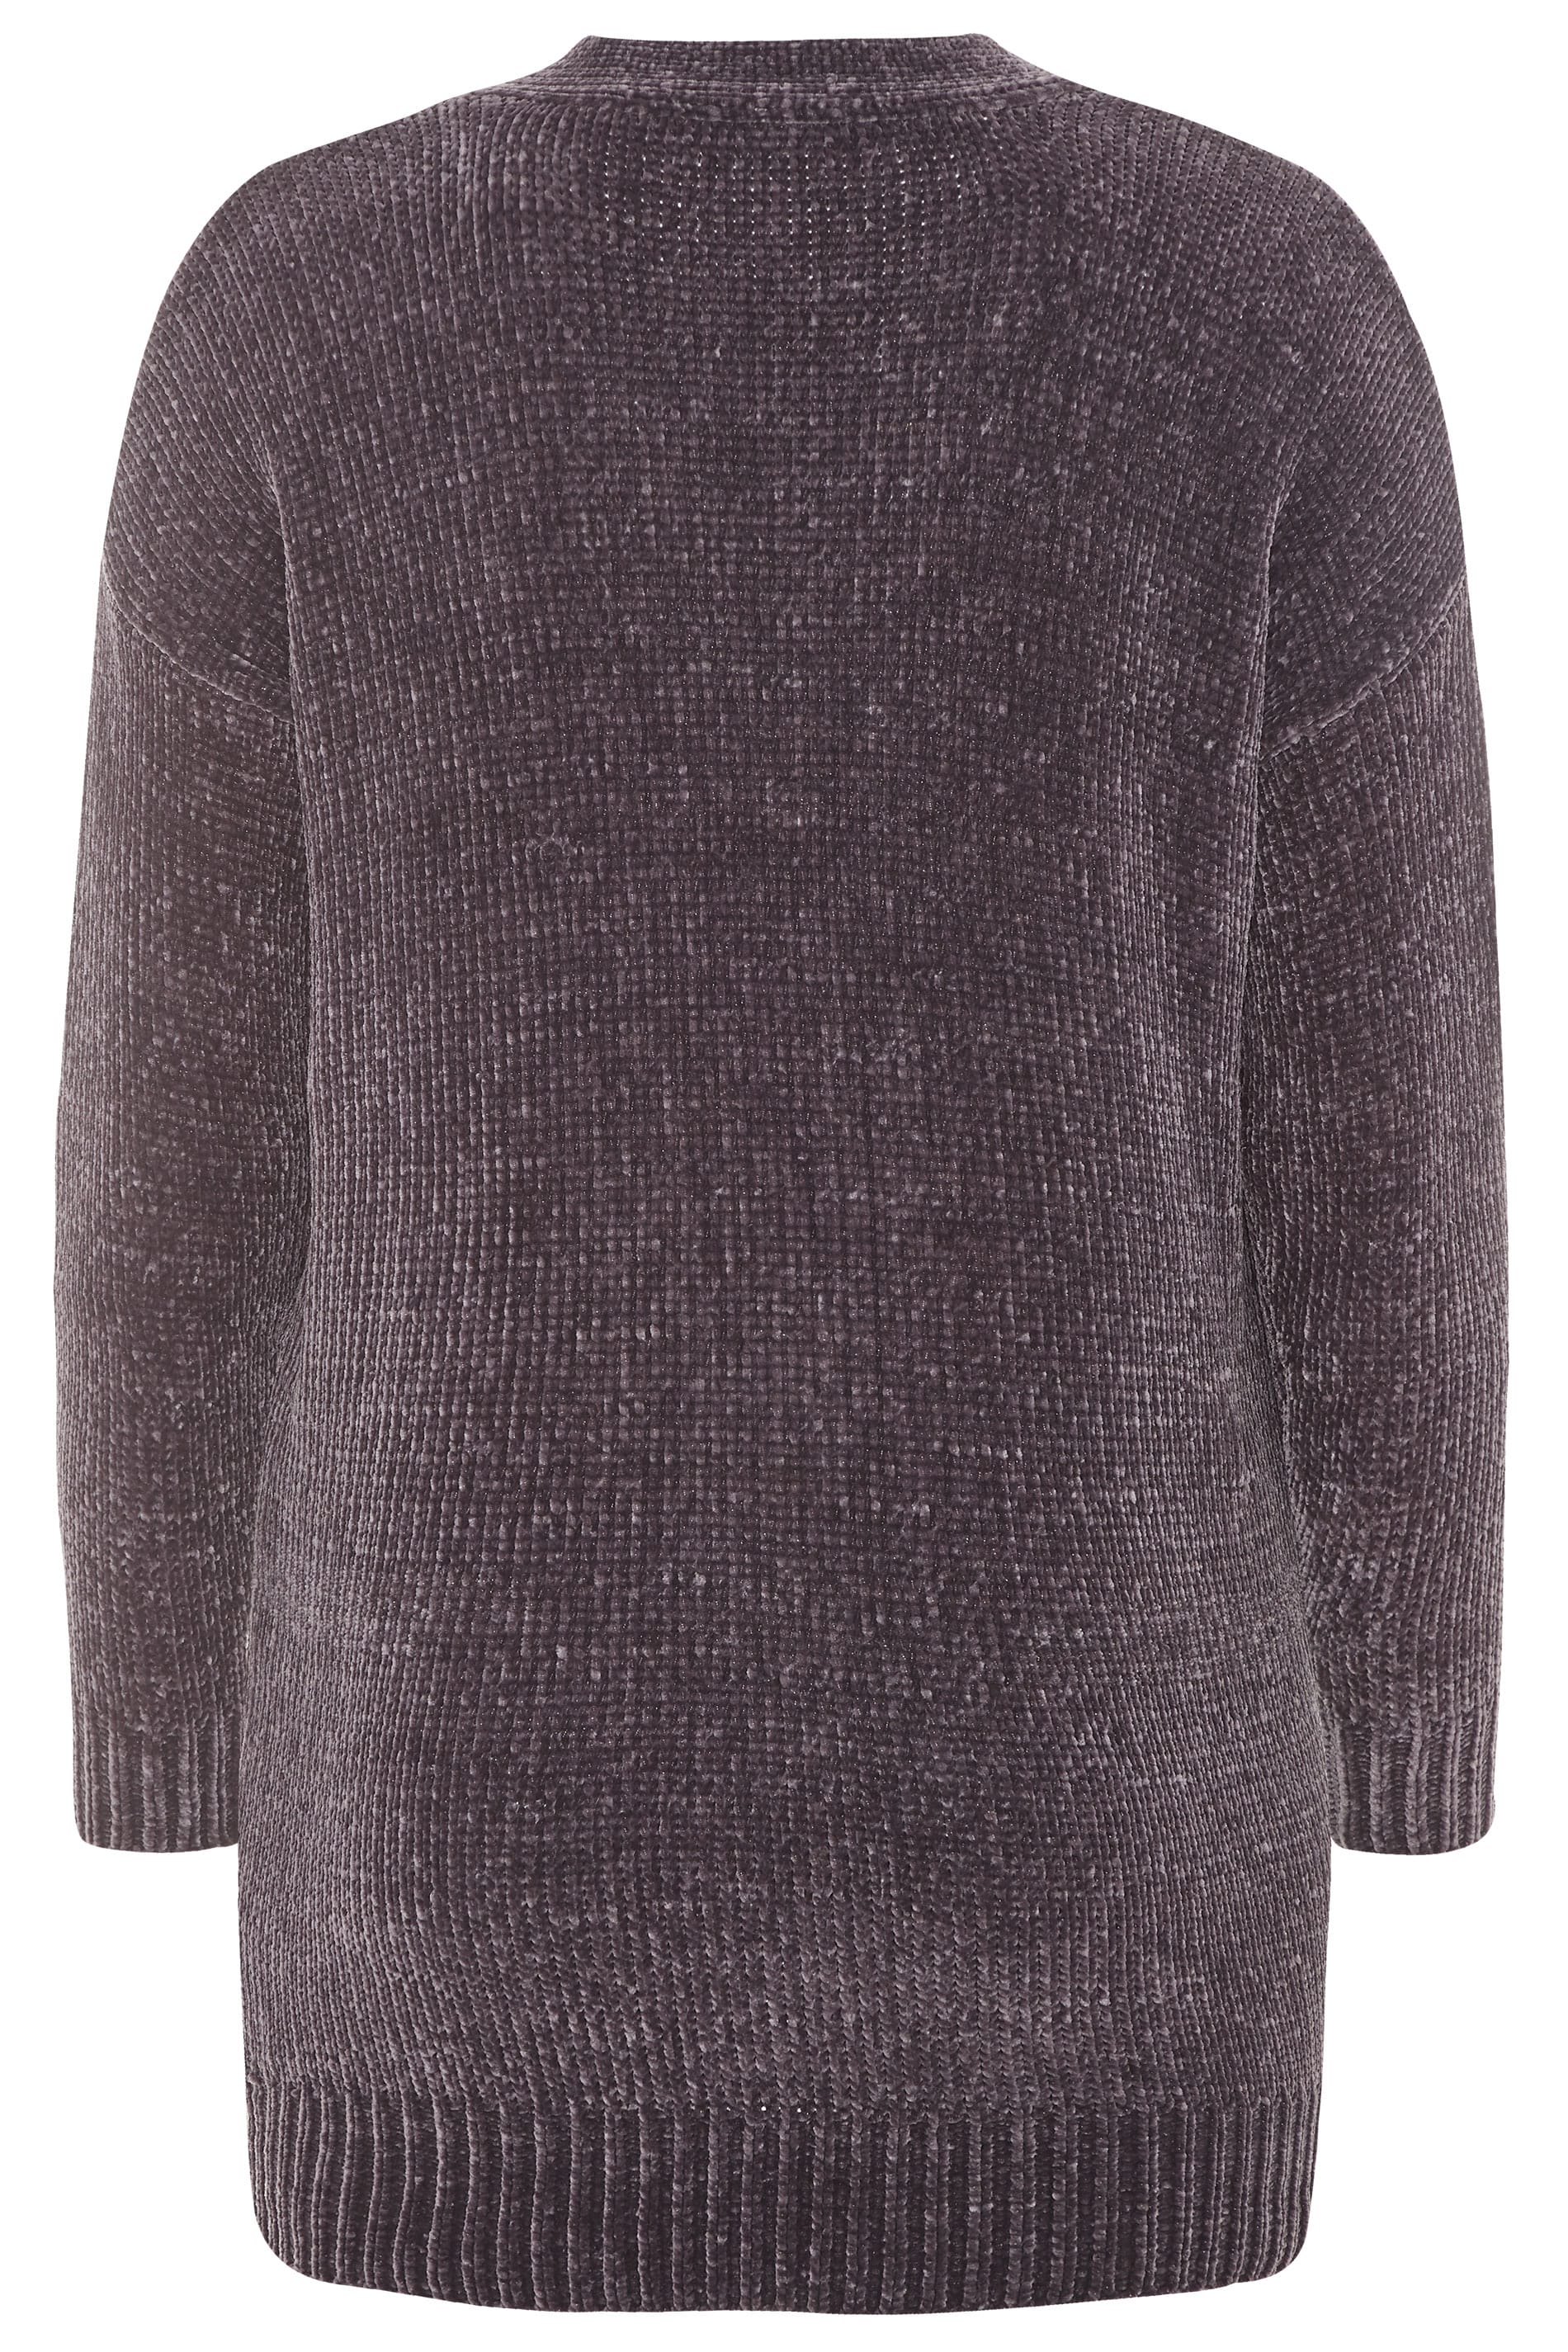 Grey Chenille Knitted Cardigan | Yours Clothing